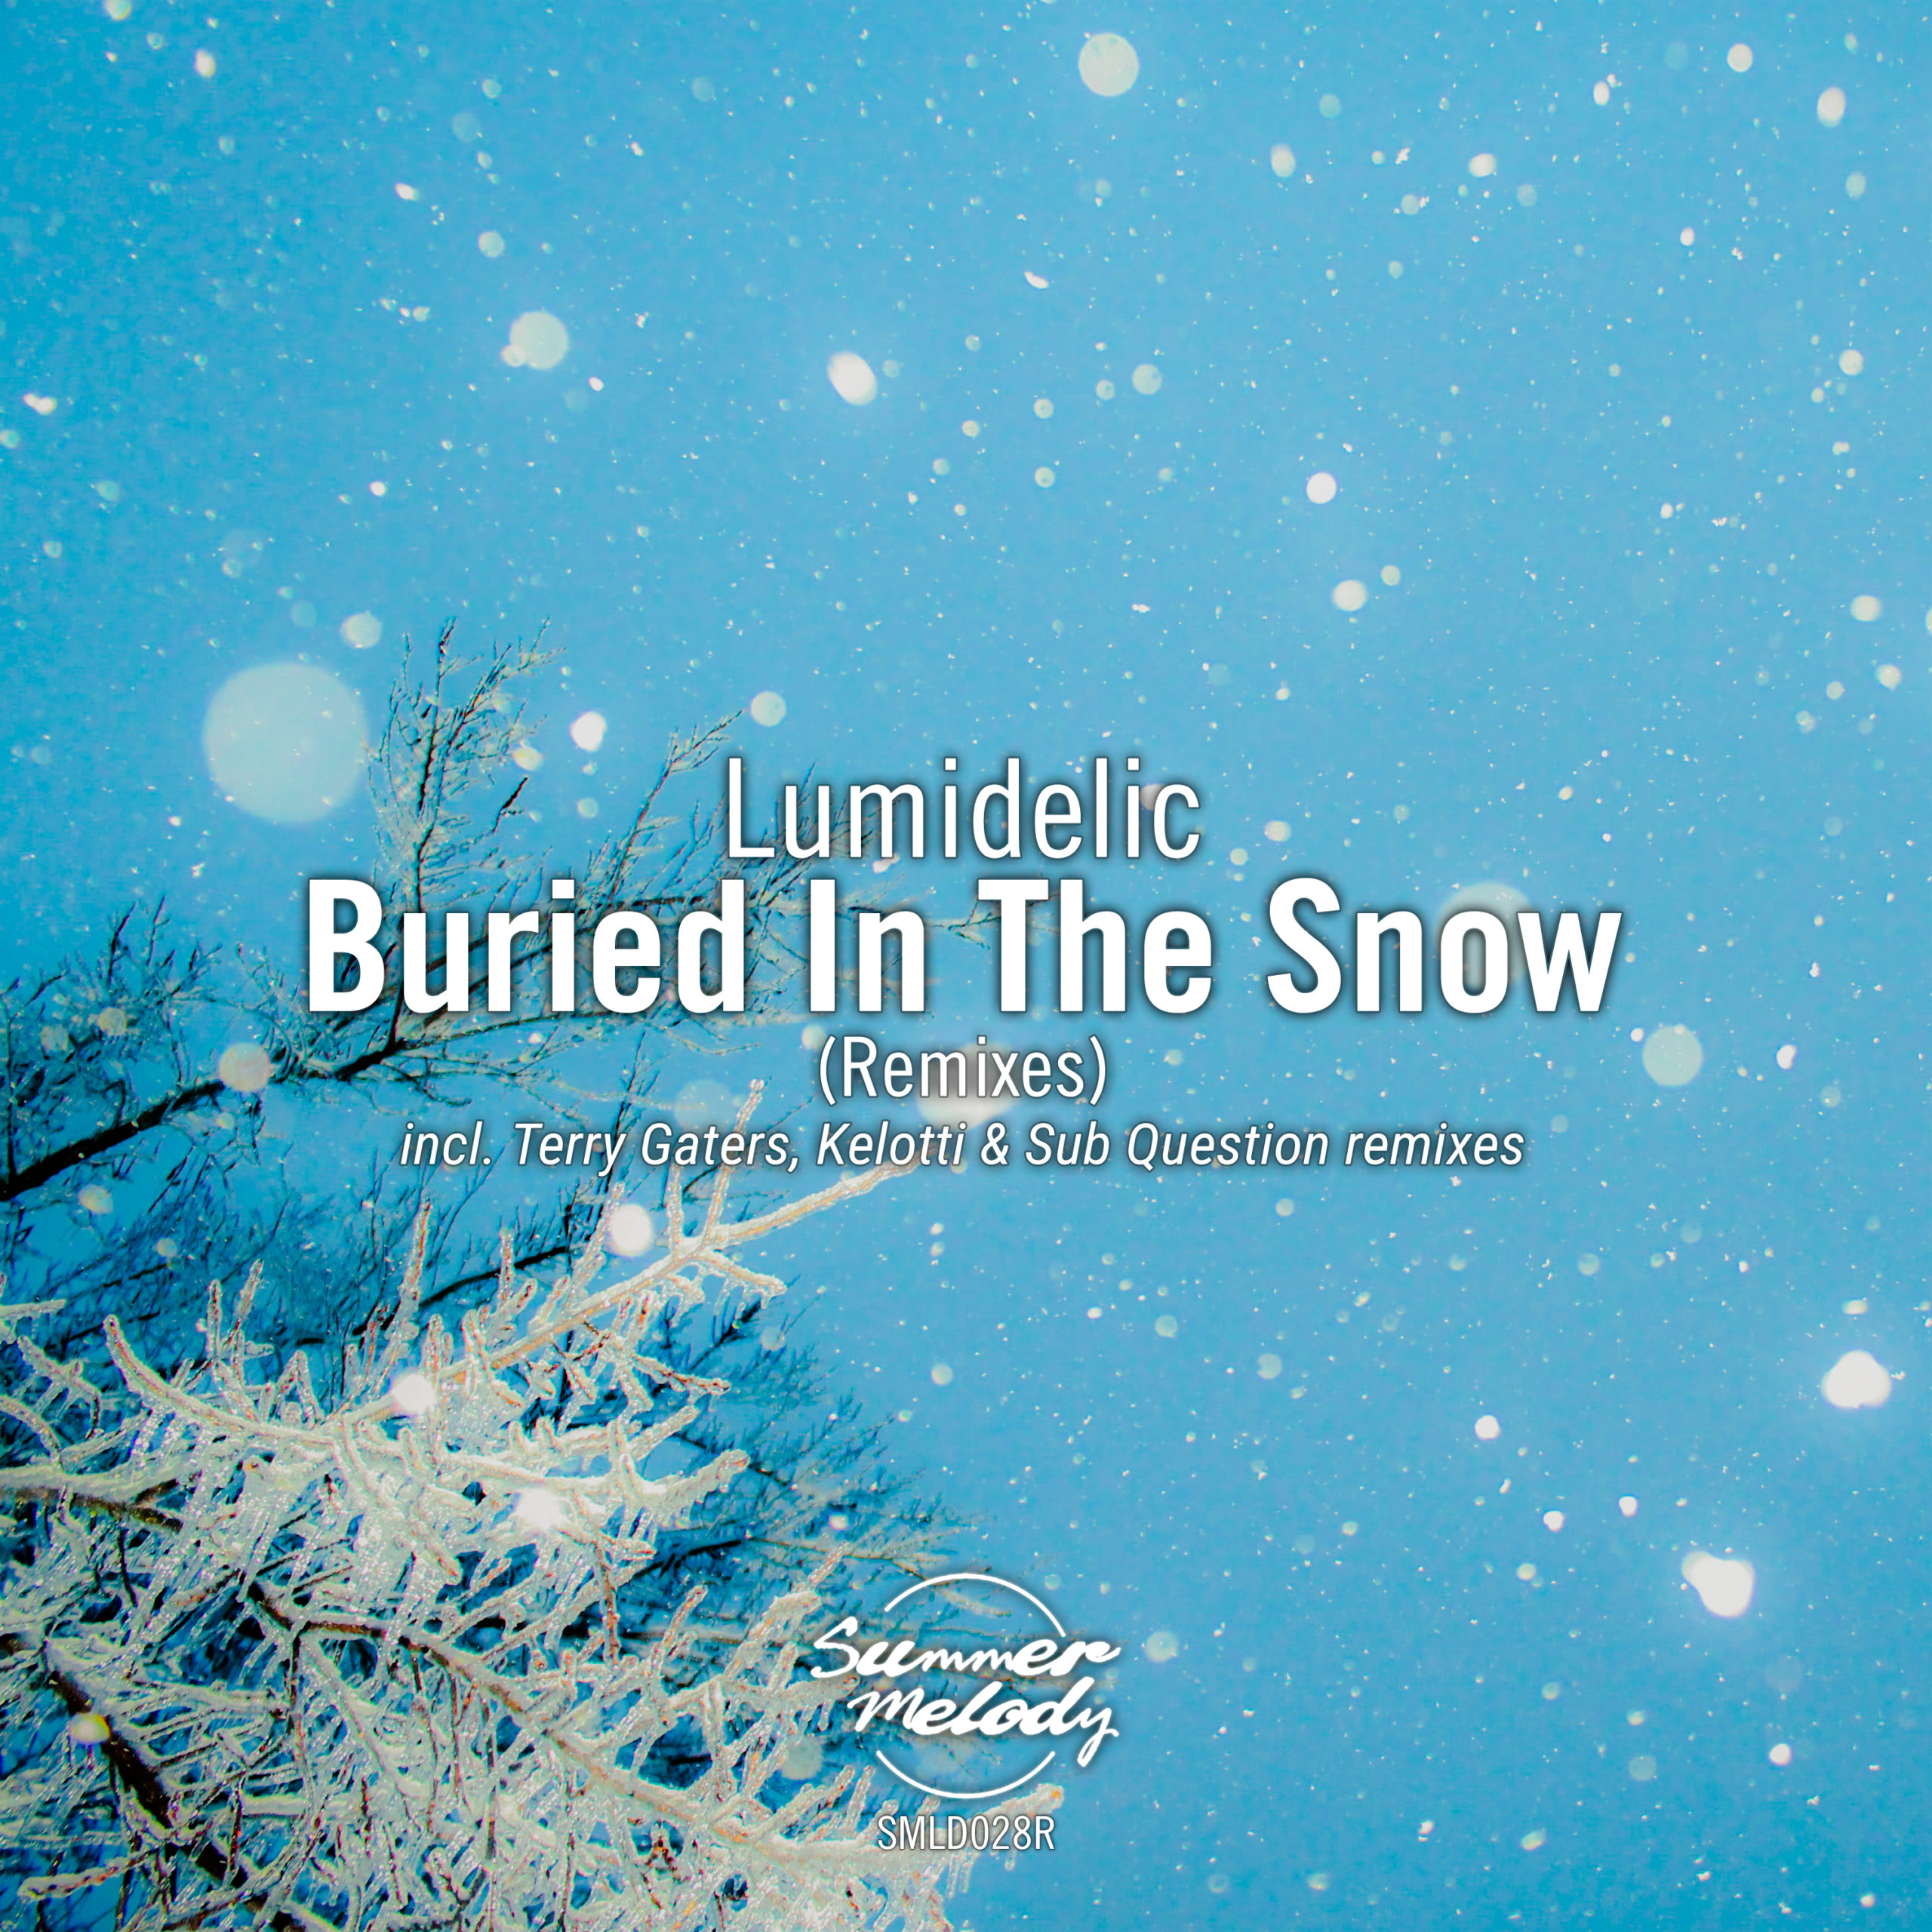 Lumidelic presents Buried In The Snow (Remixes) on Summer Melody Records